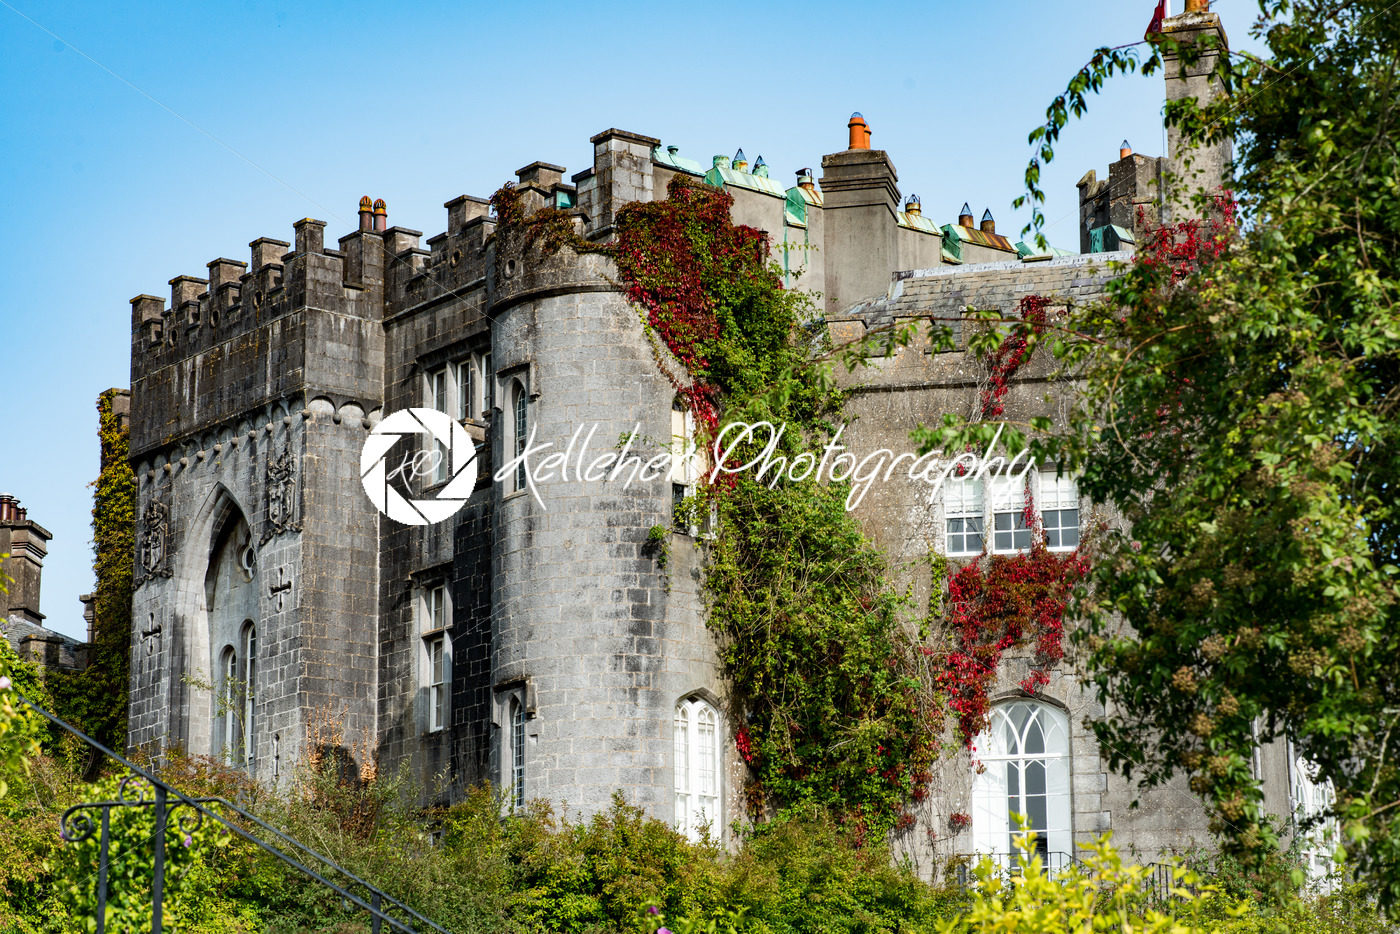 COUNTY OFFALY, IRELAND – AUGUST 23, 2017: Birr Castle in County Offaly, Ireland - Kelleher Photography Store